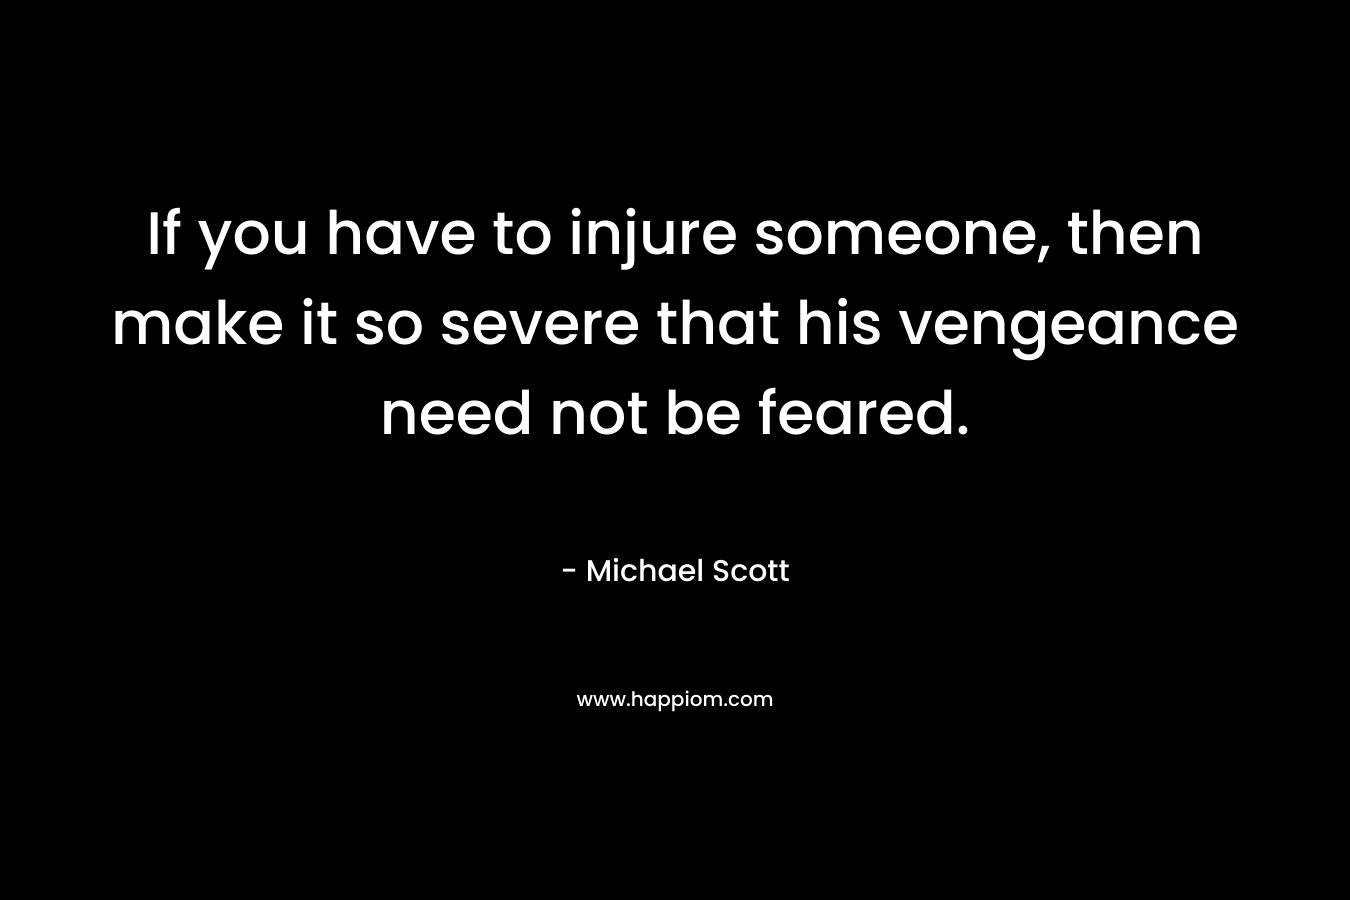 If you have to injure someone, then make it so severe that his vengeance need not be feared.